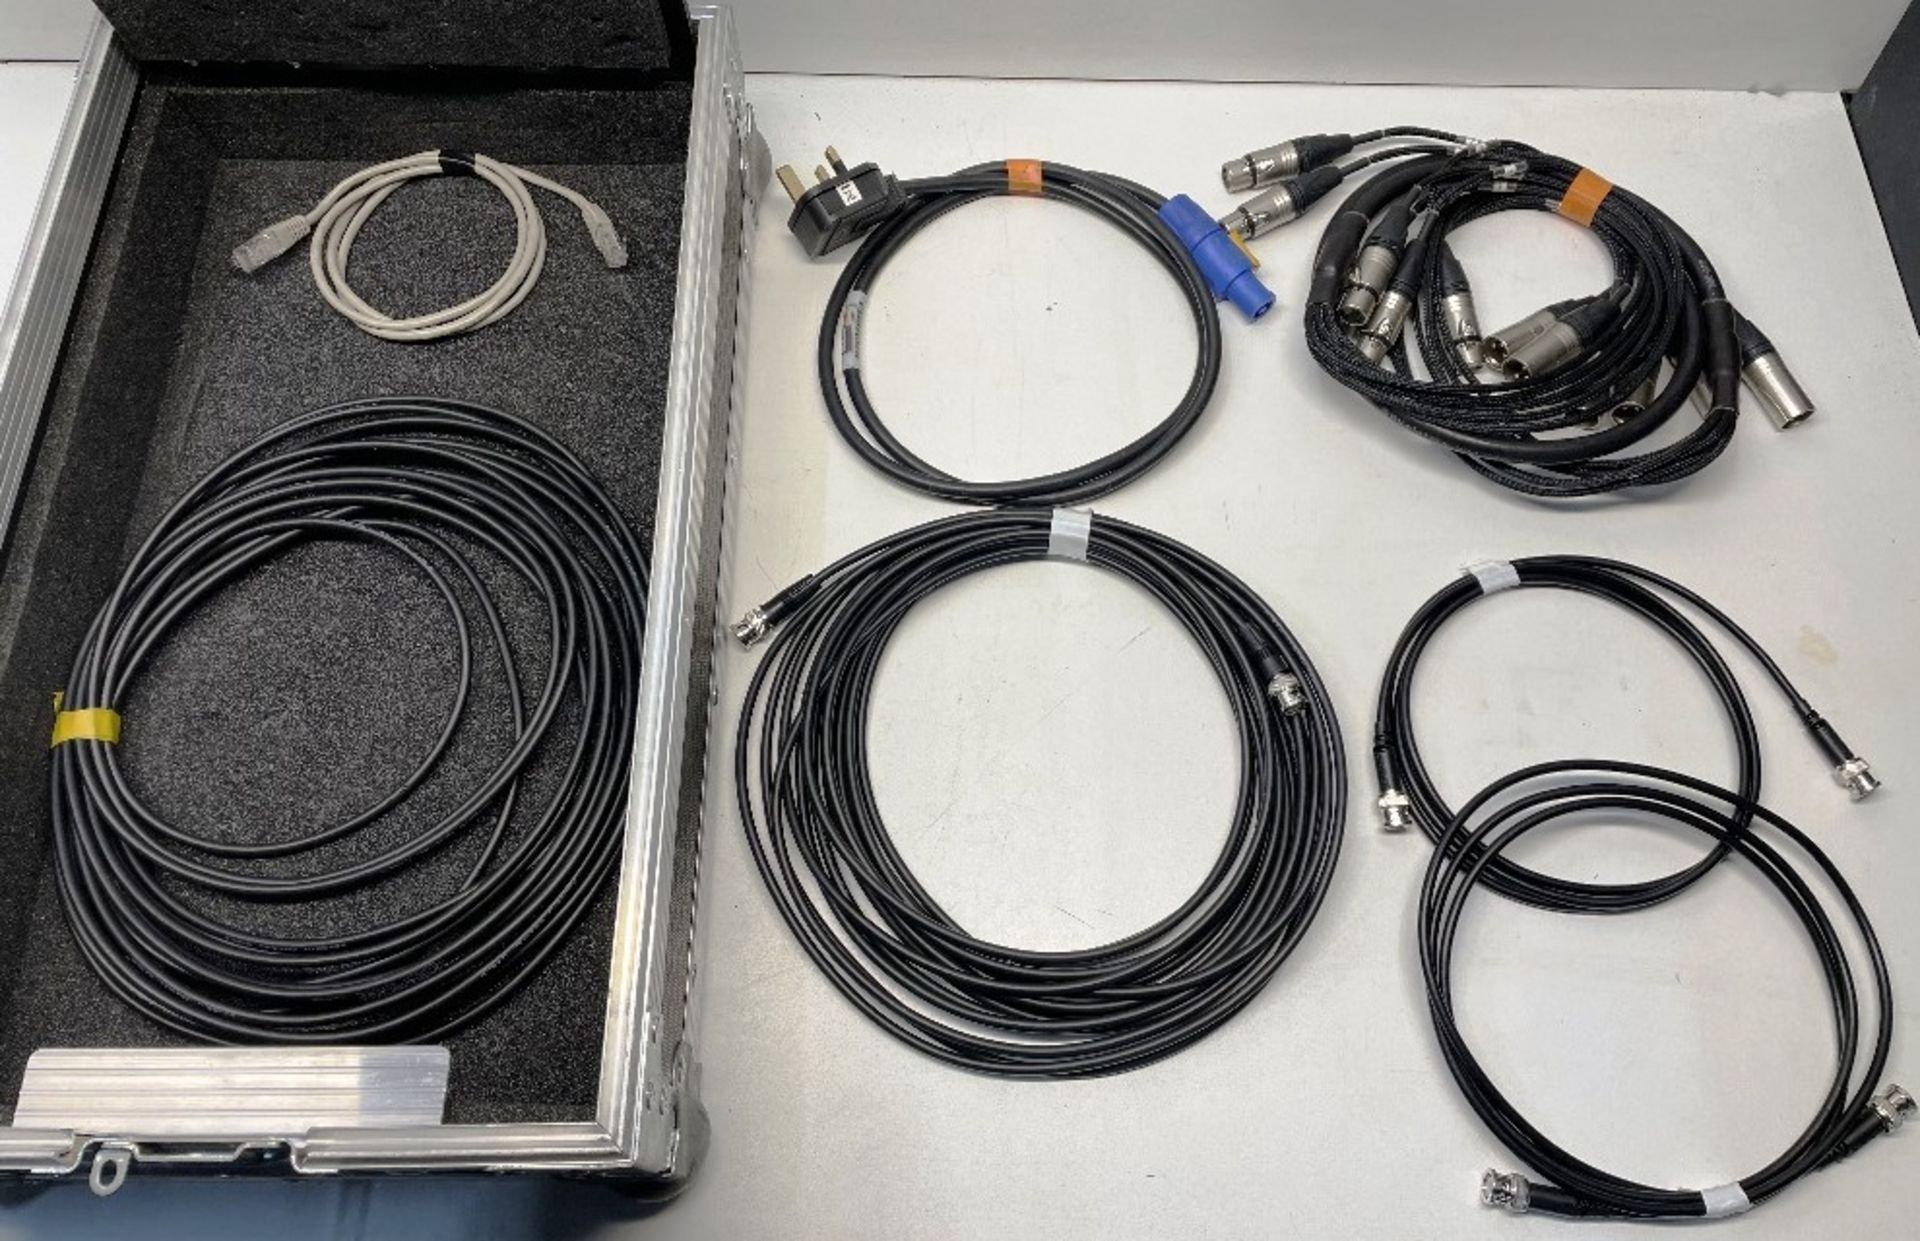 Shure QLXD Kit w/ 4 x Receivers, Microphones, Antenna Distro, Belt pack Transmitters, Antennas & Acc - Image 19 of 26